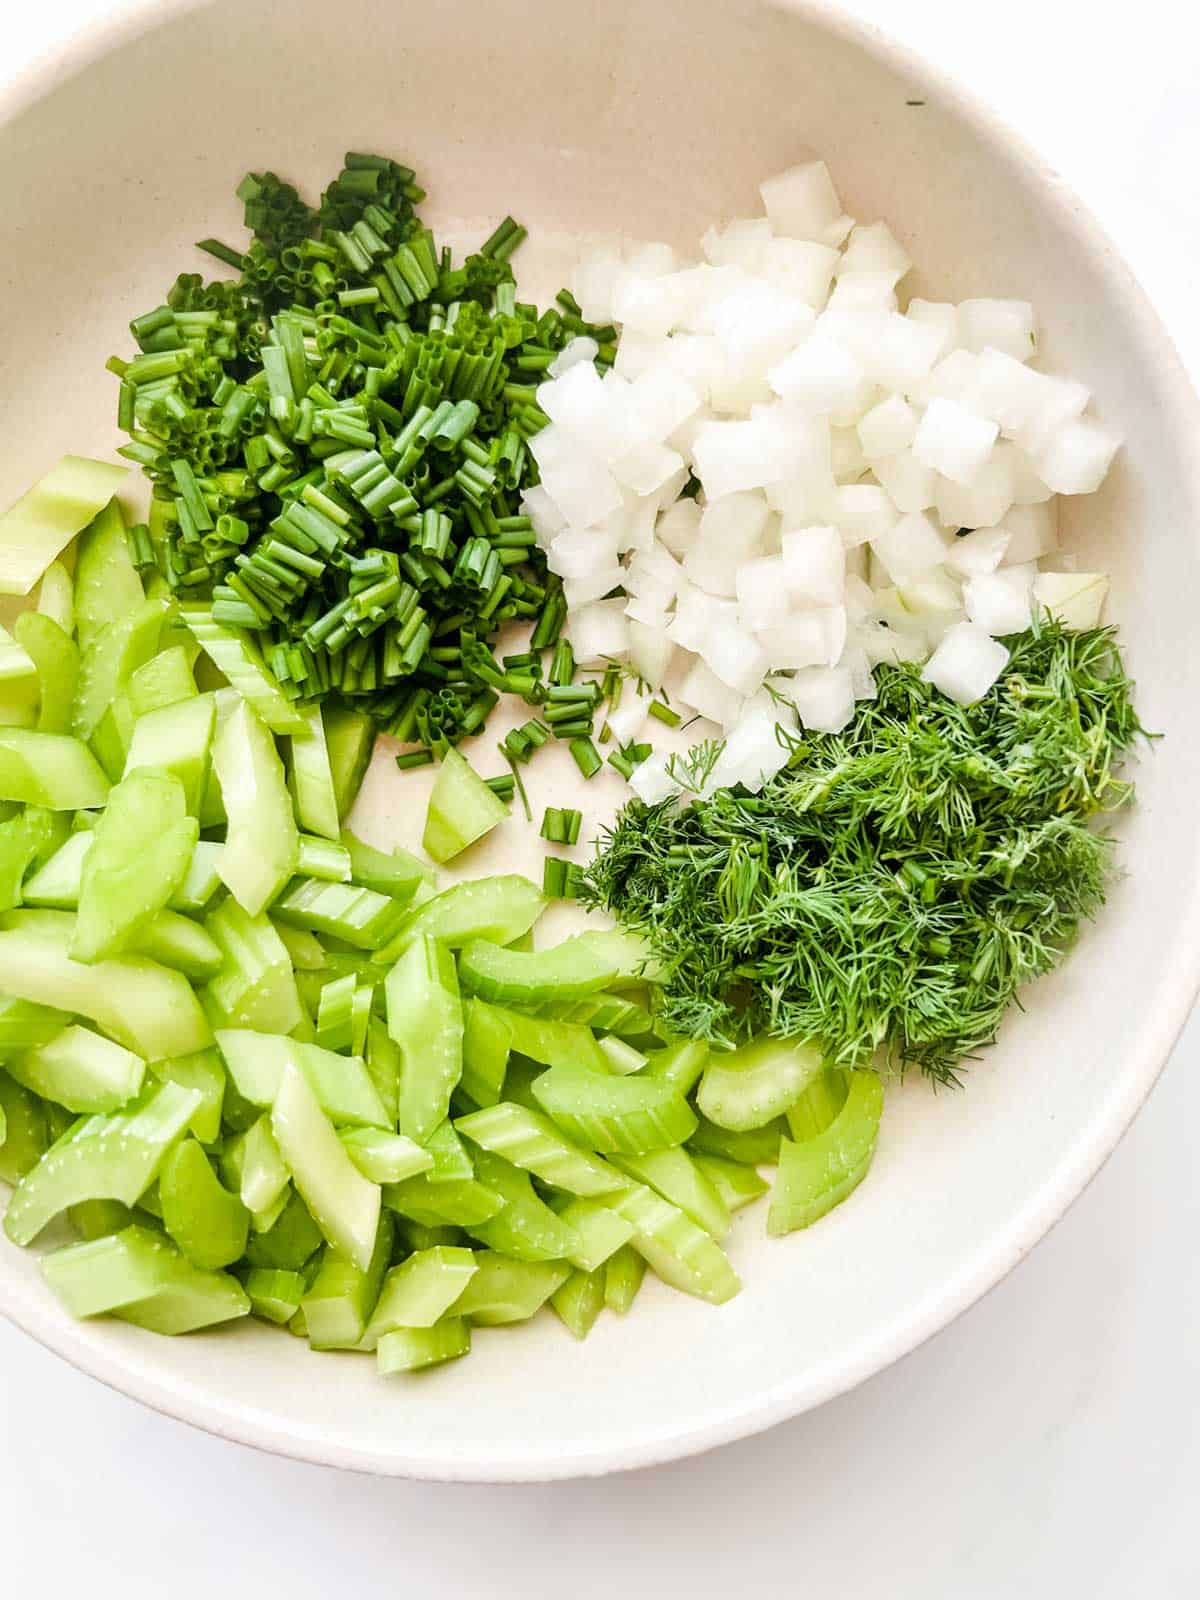 Photo of celery, onion, chives, and dill in a bowl.